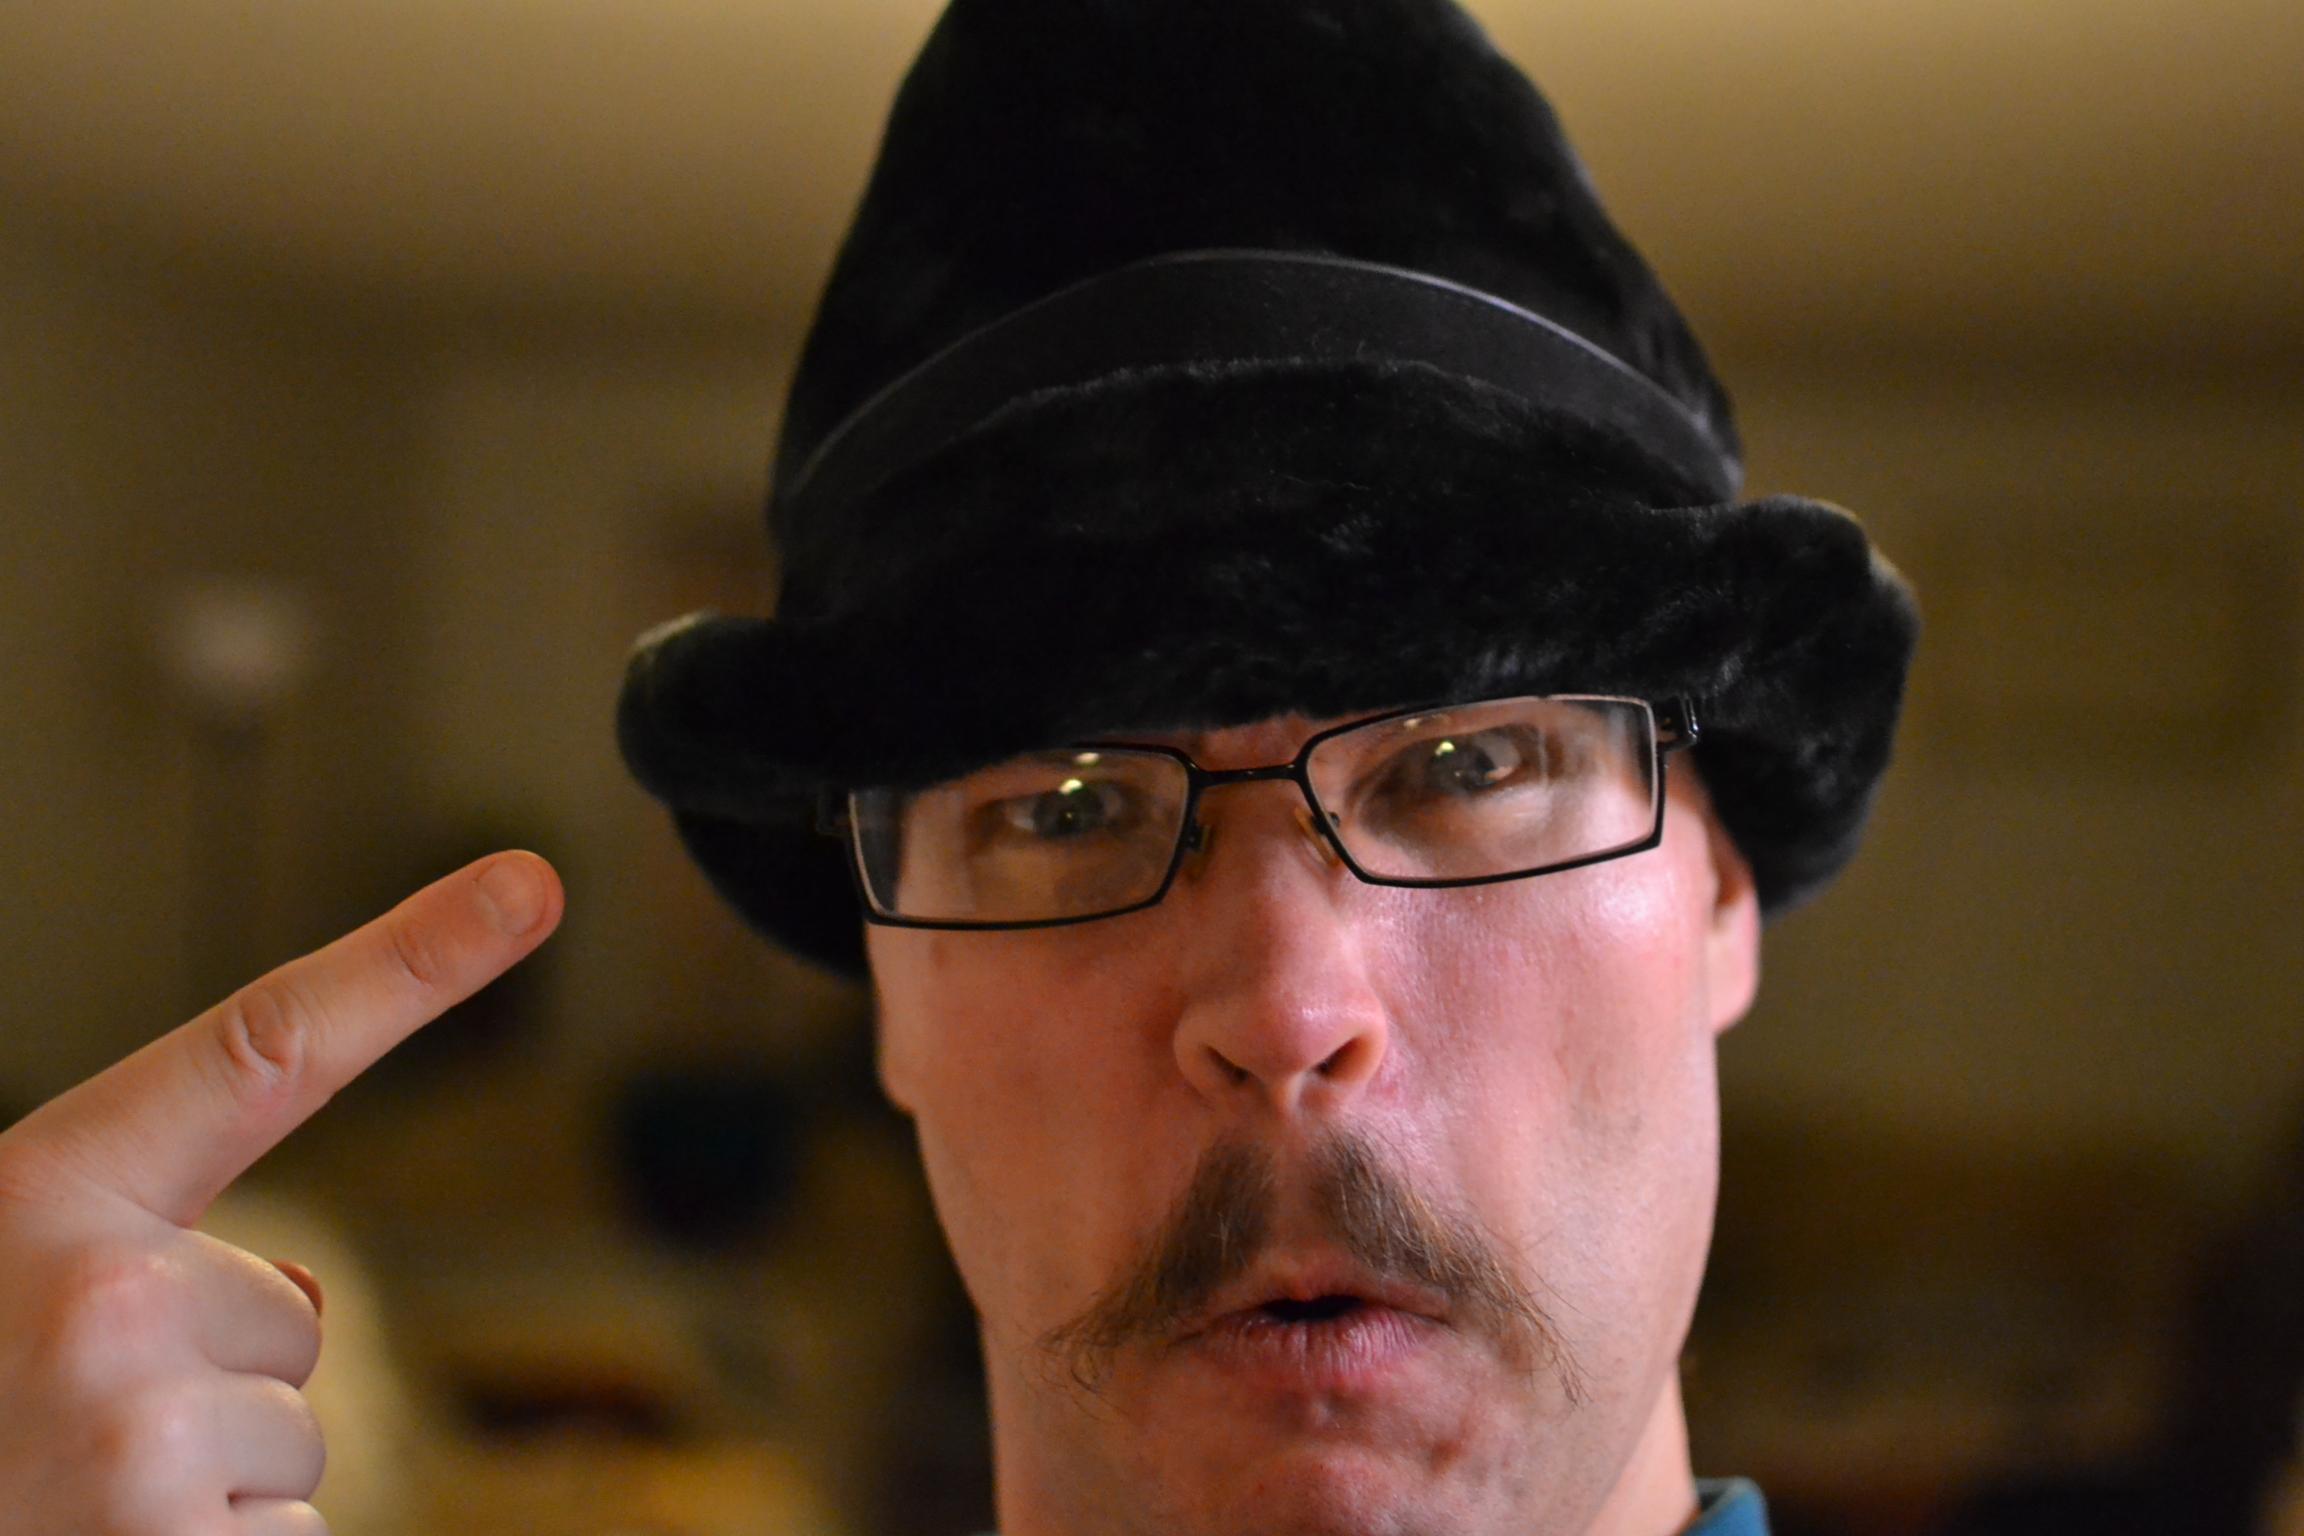 a man wearing a hat and glasses is pointing up